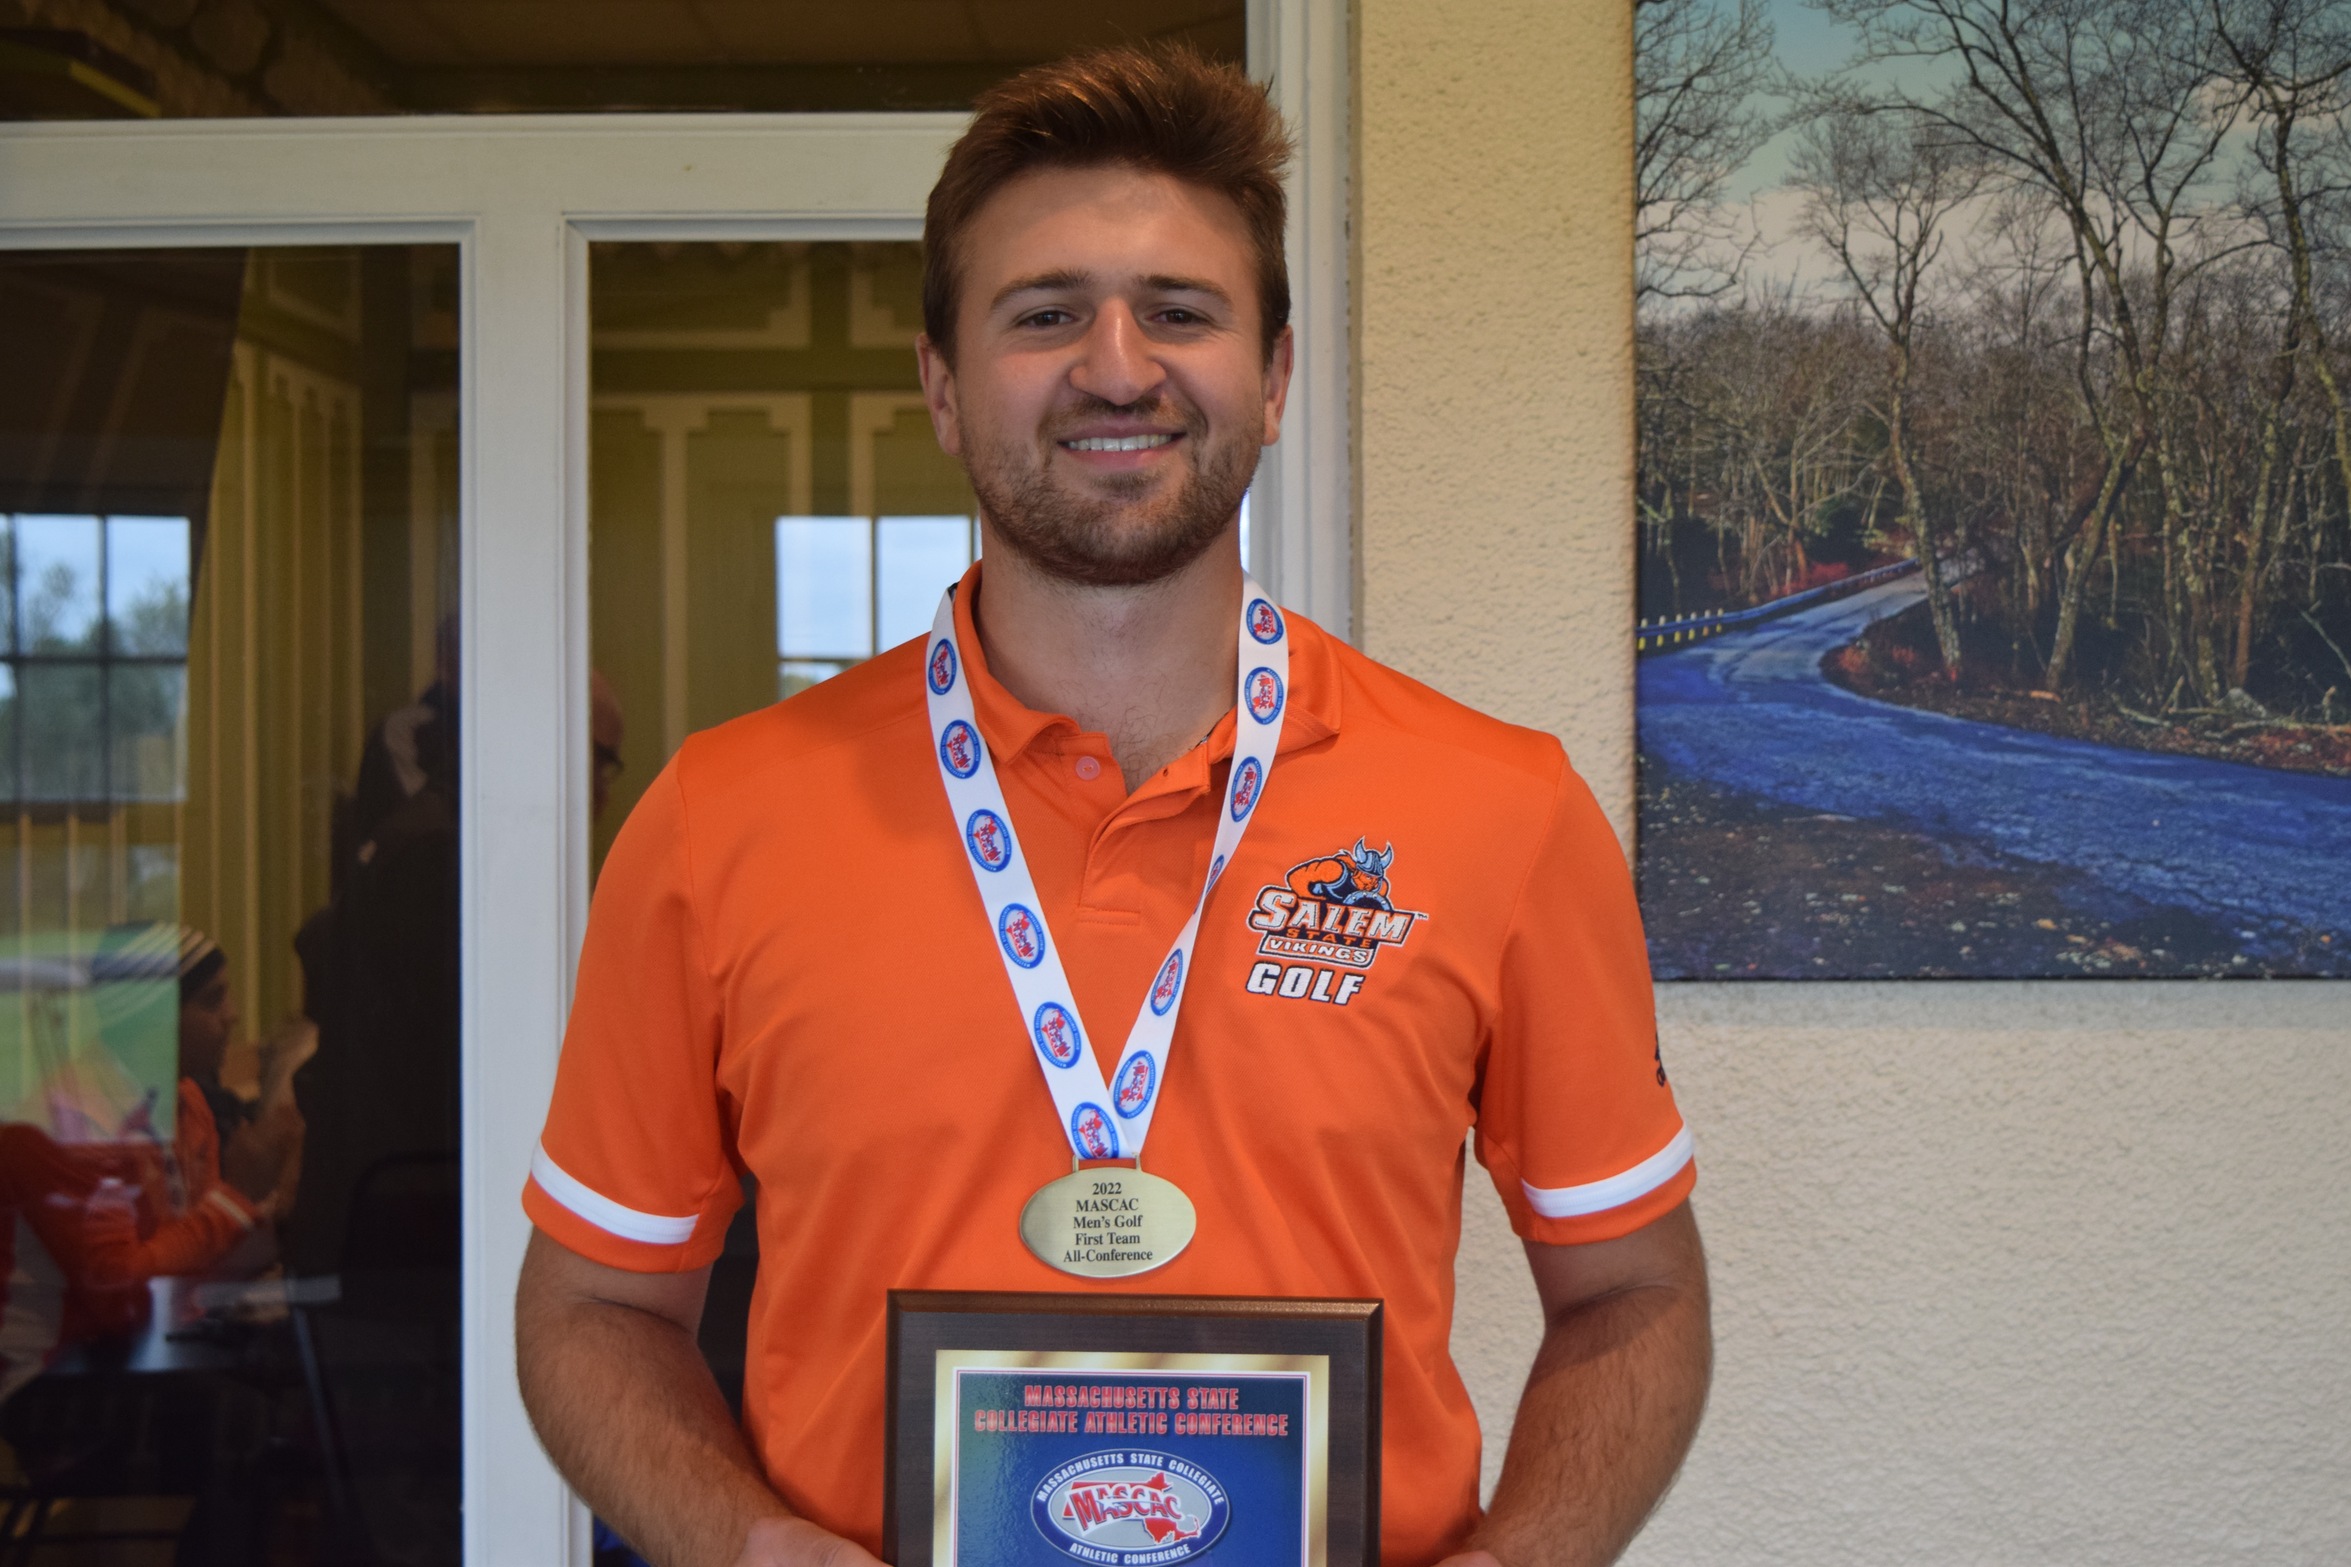 Salem State's Cannata Earns MASCAC Men’s Golf Player of the Year, Headlines 2022 All-Conference Team